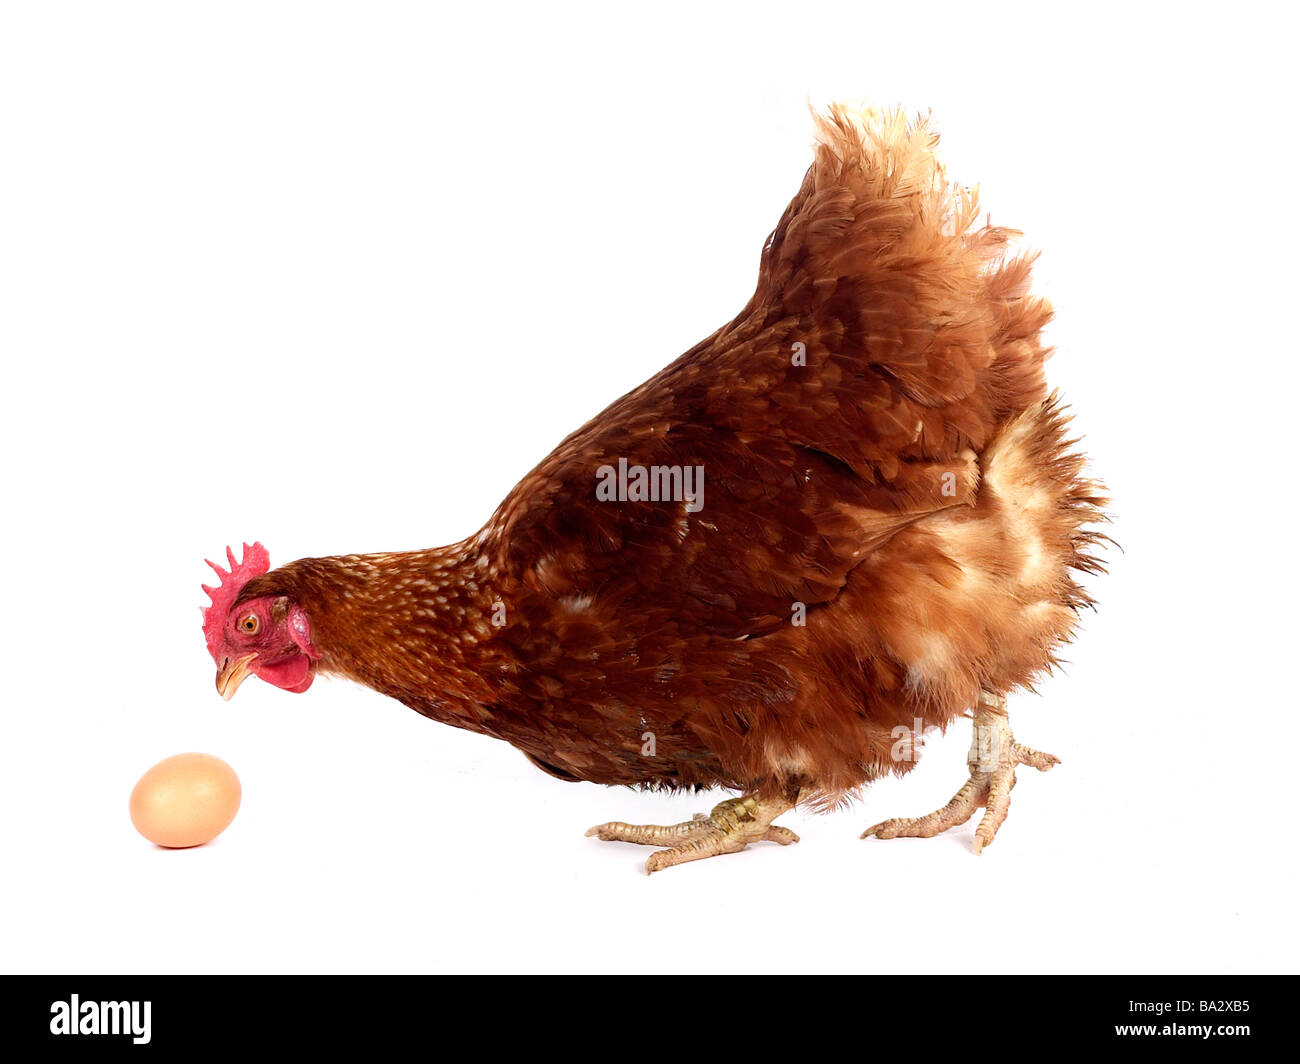 A chicken and egg situation, a chicken with an egg. Stock Photo